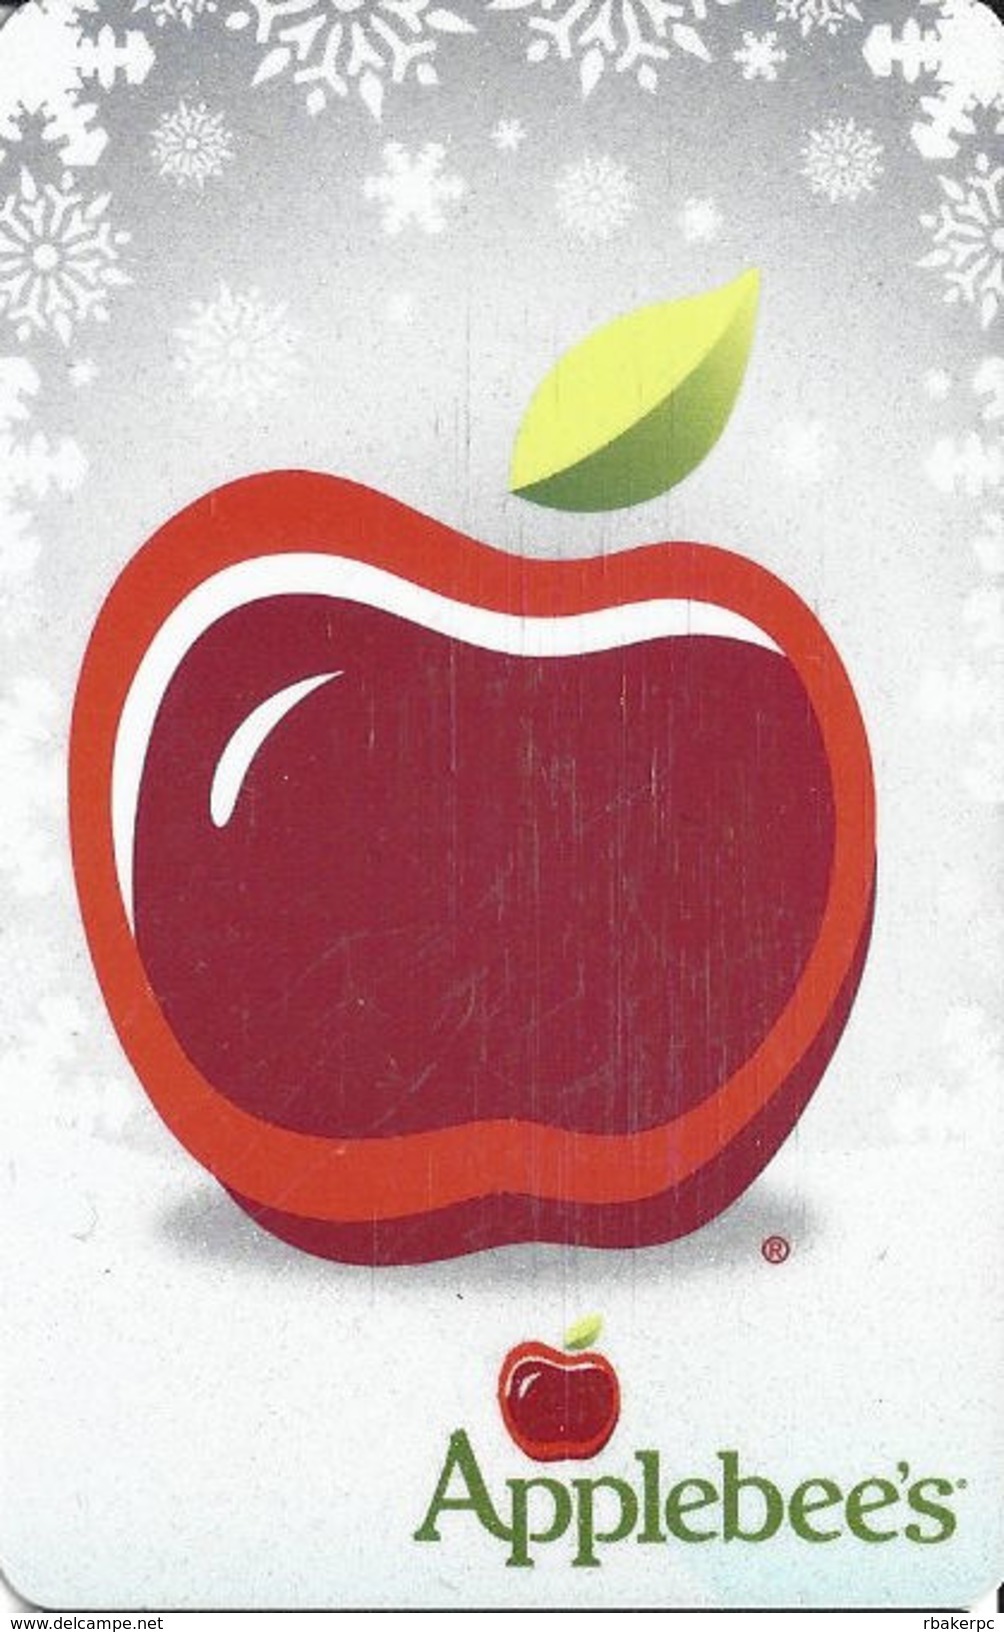 Applebees Gift Card - Gift Cards